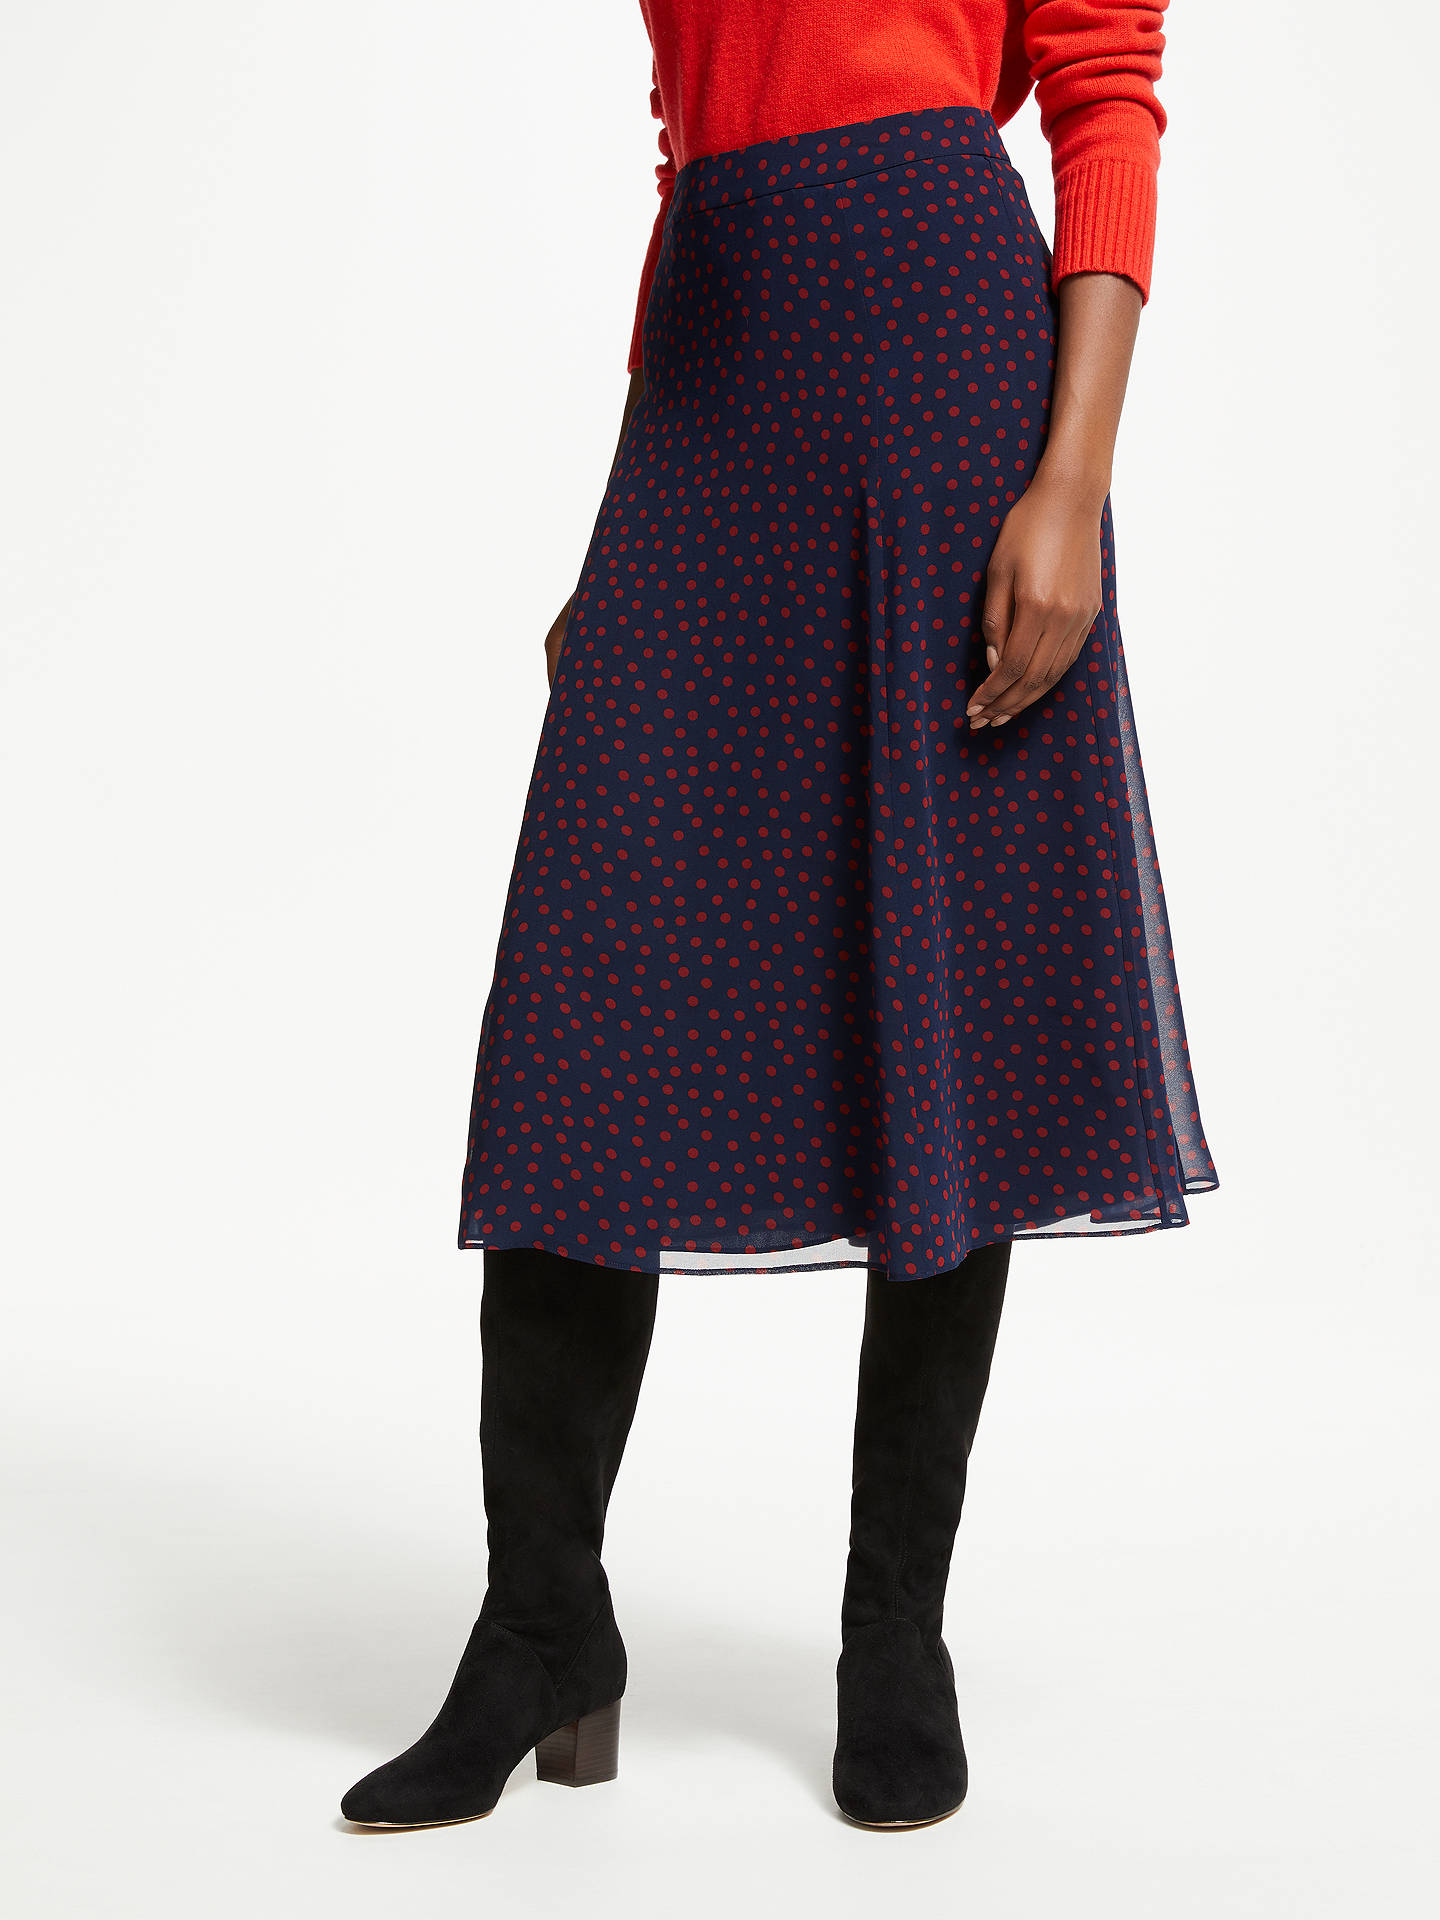 Boden Serena Midi Skirt, Navy With Red Spots at John Lewis & Partners